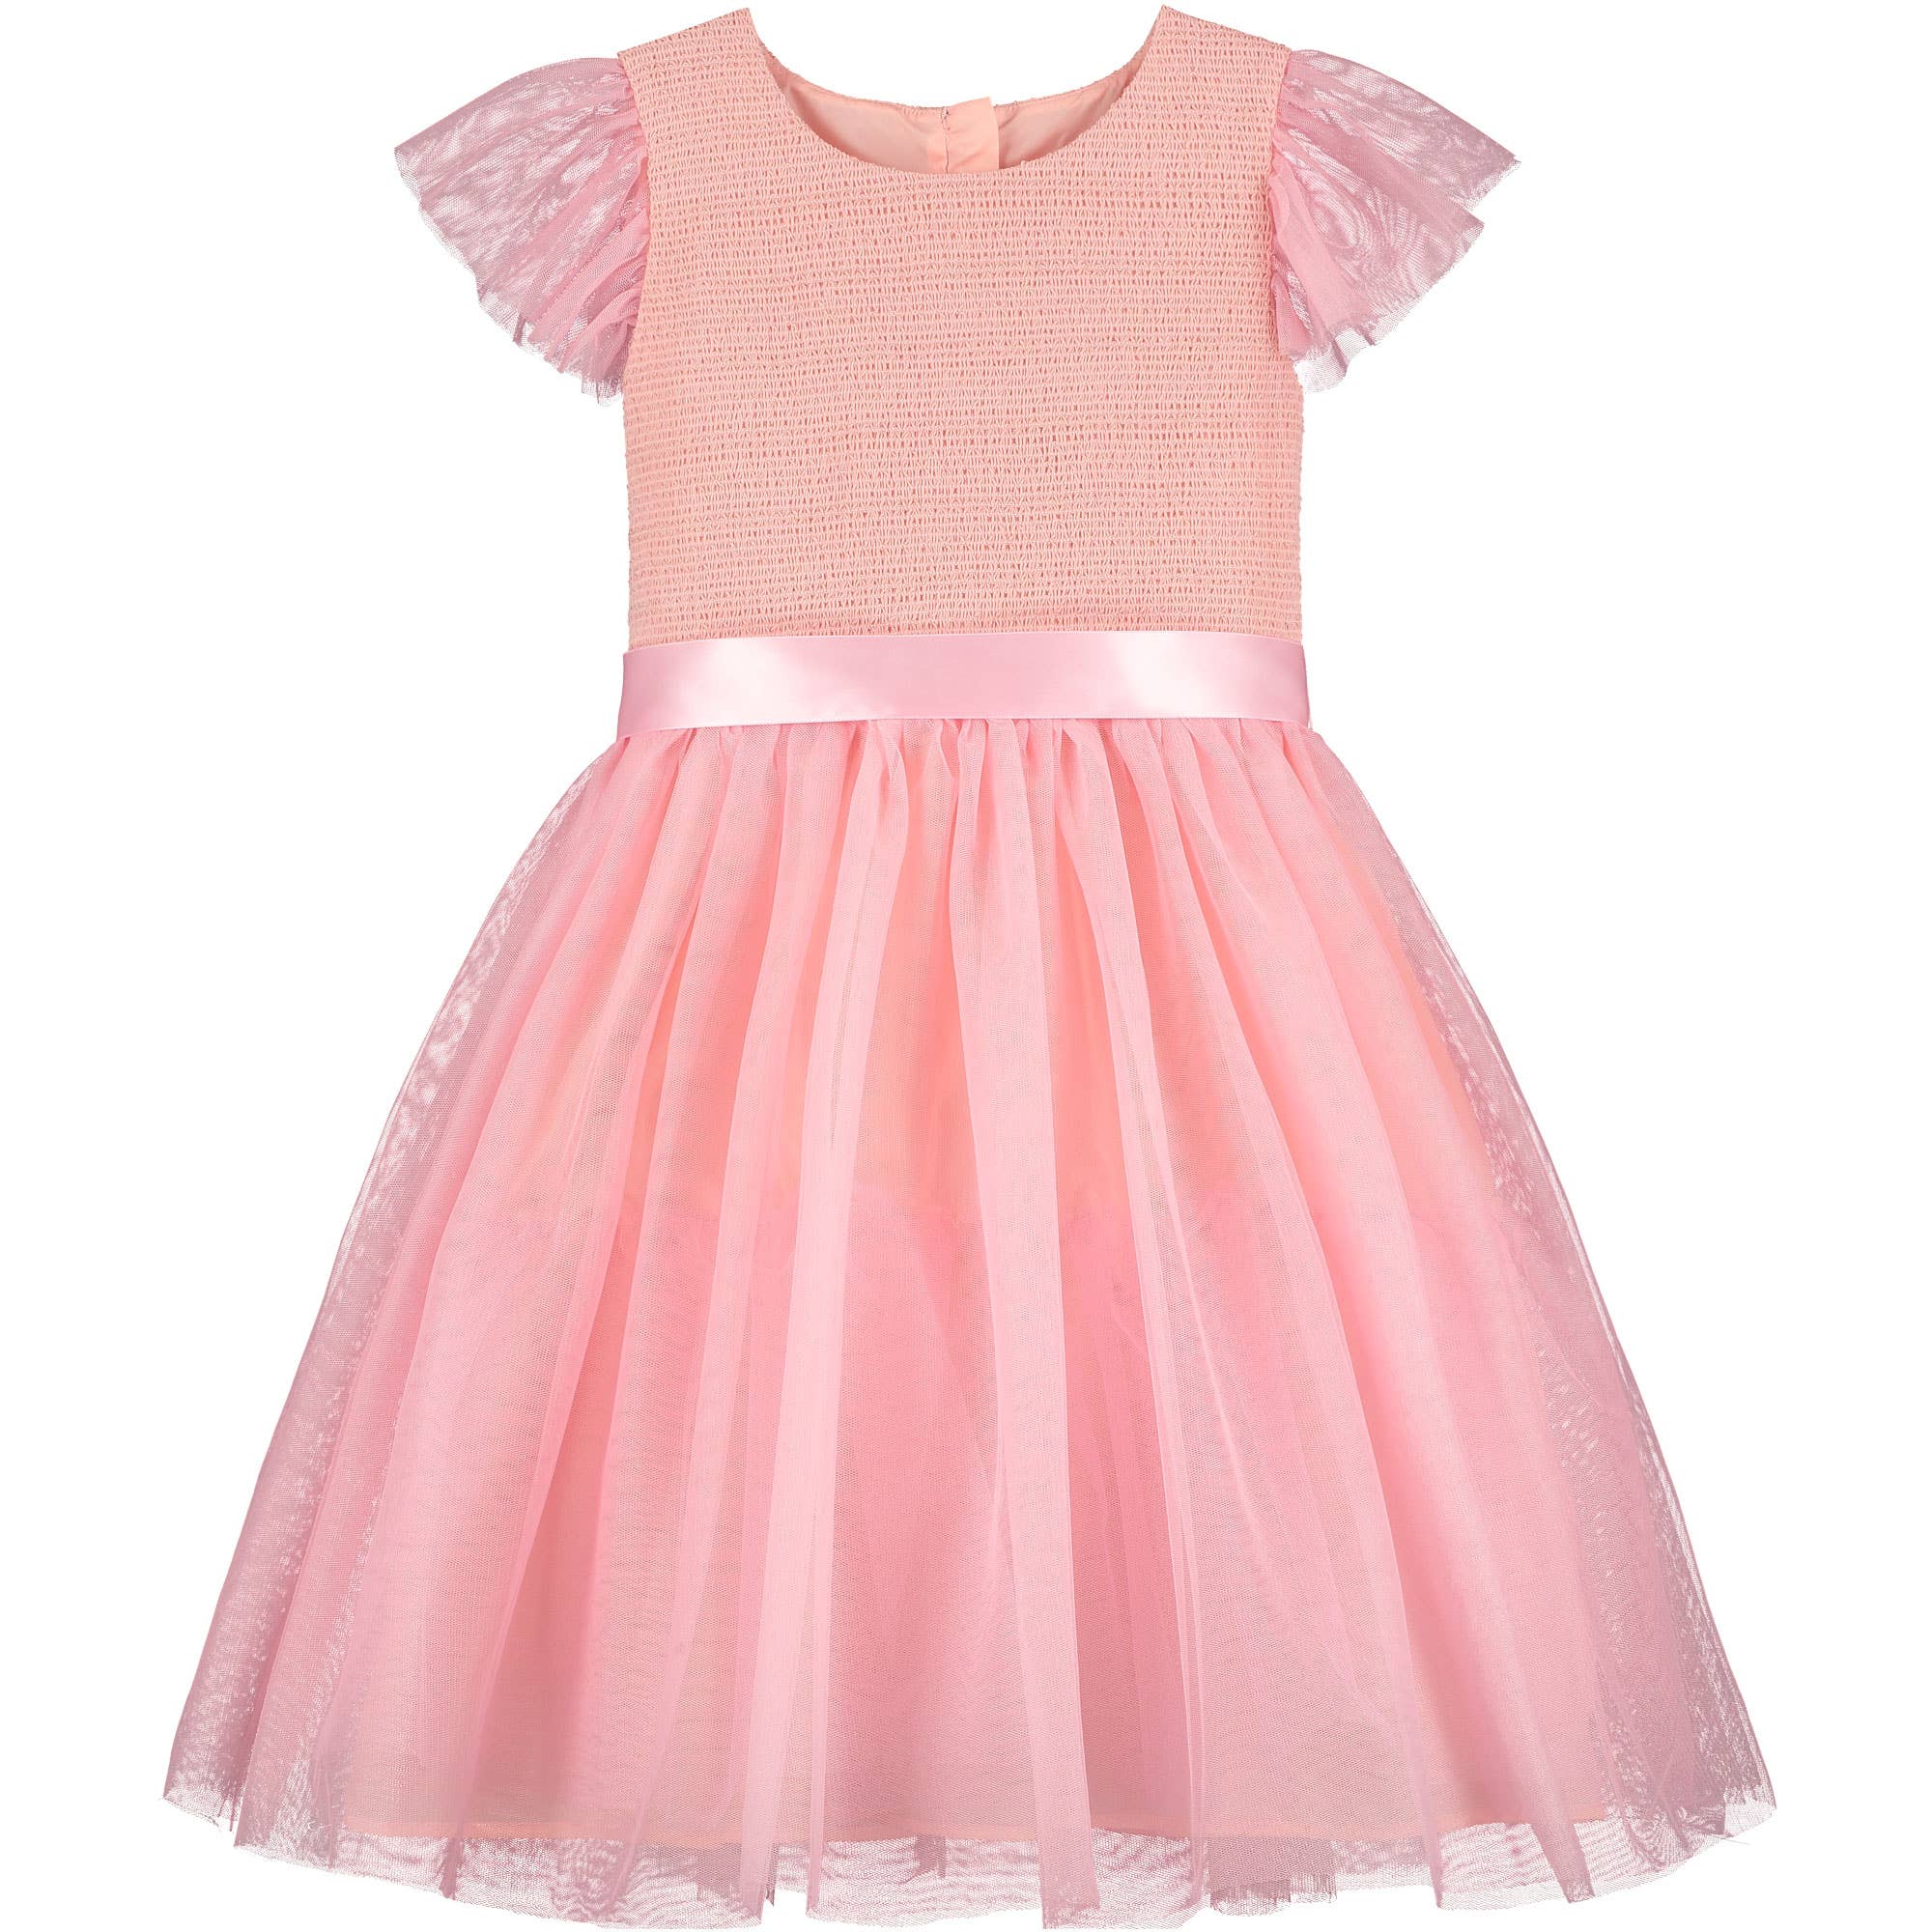 Hollie Hastie Confetti Pink Smoked Party Dress  | Le Petite Putti 